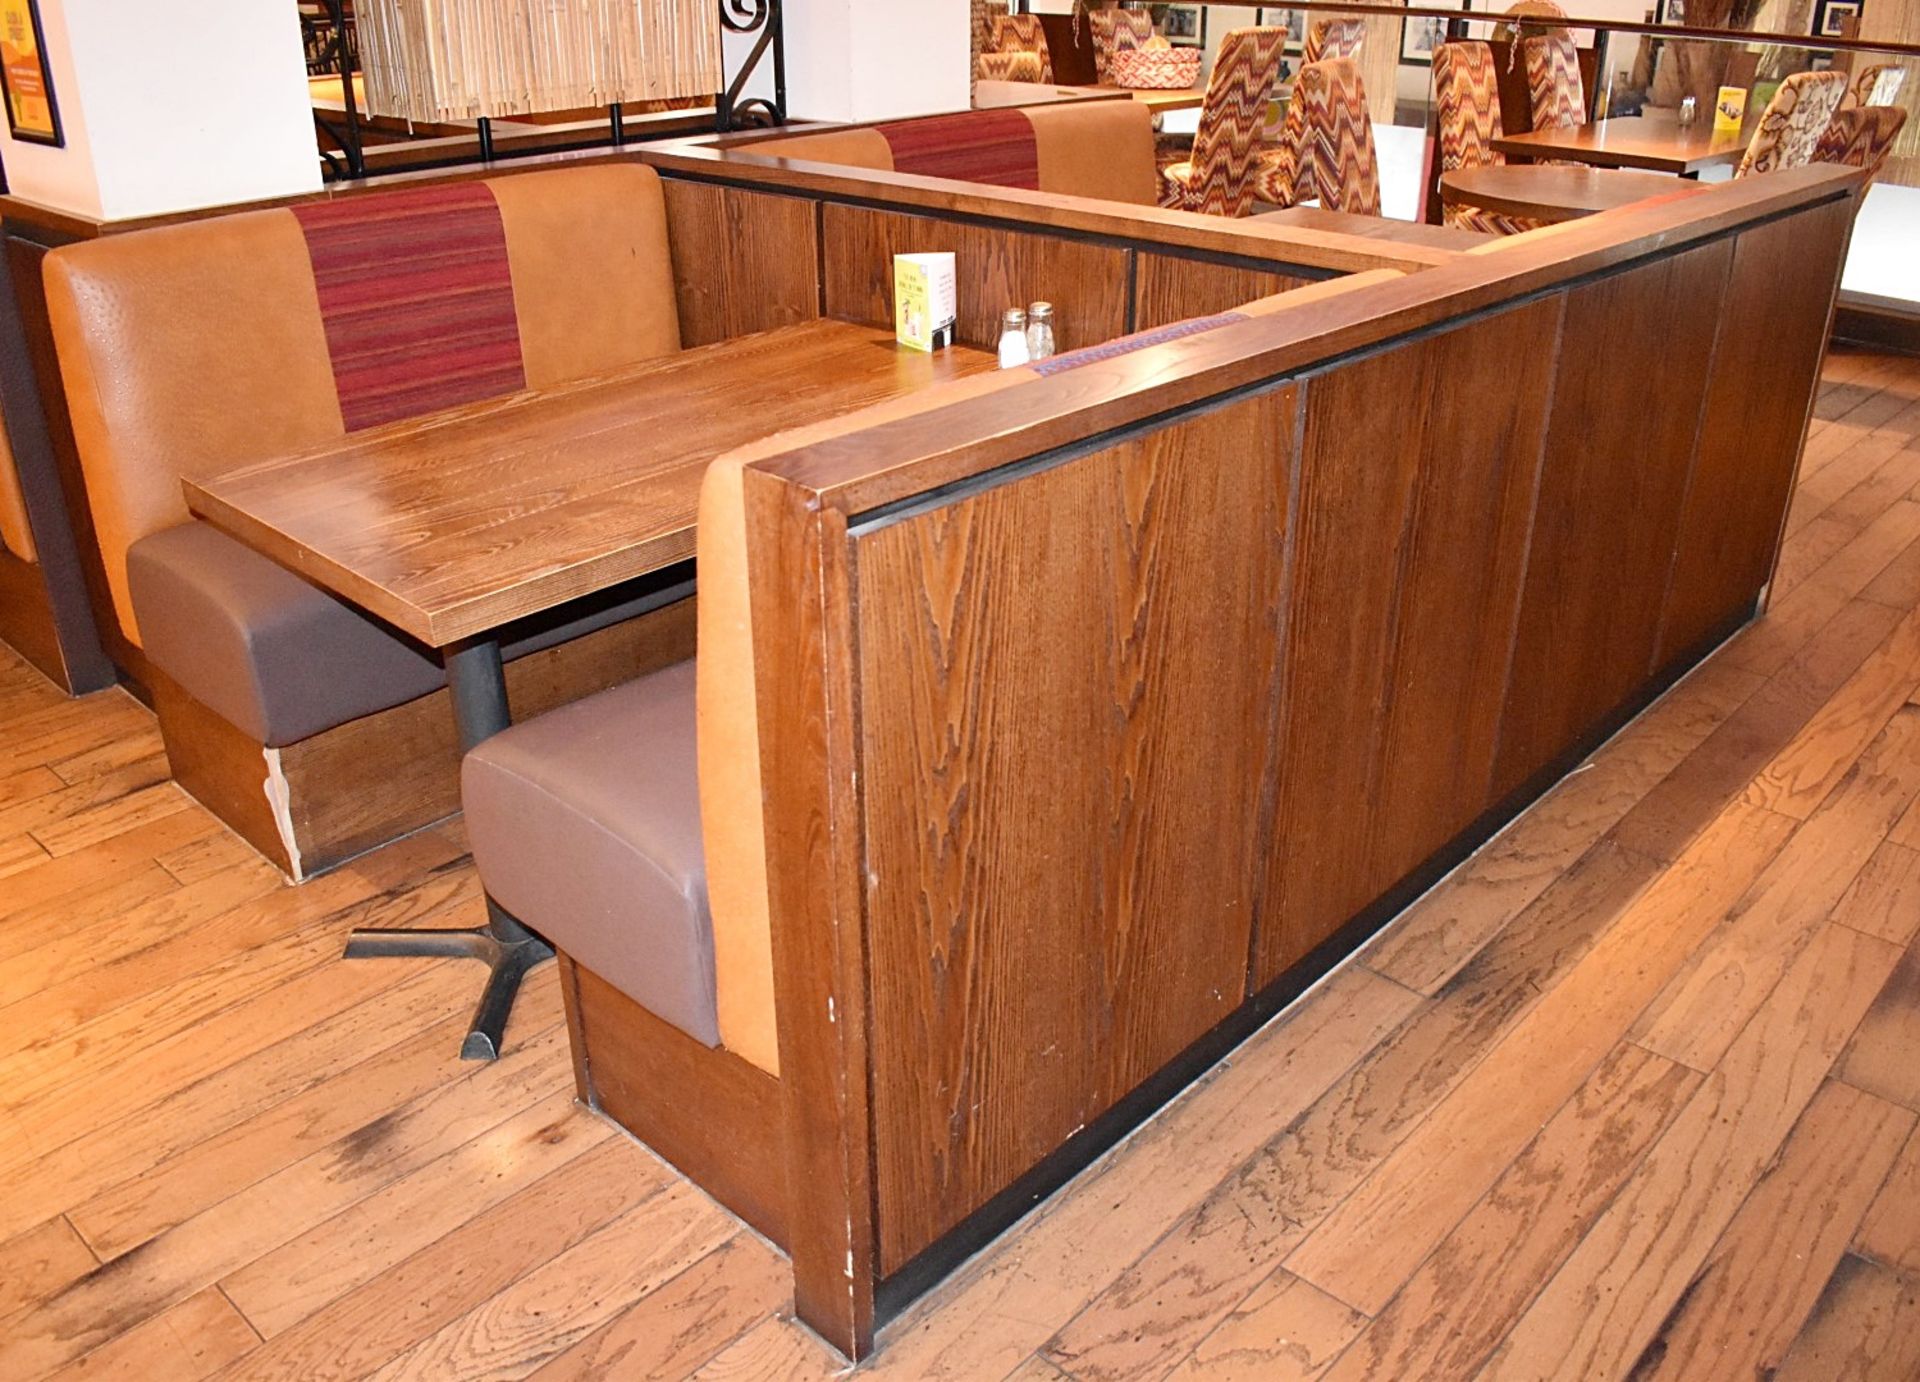 15-Pieces Of Restaurant Booth Seating Of Varying Length - Image 18 of 22